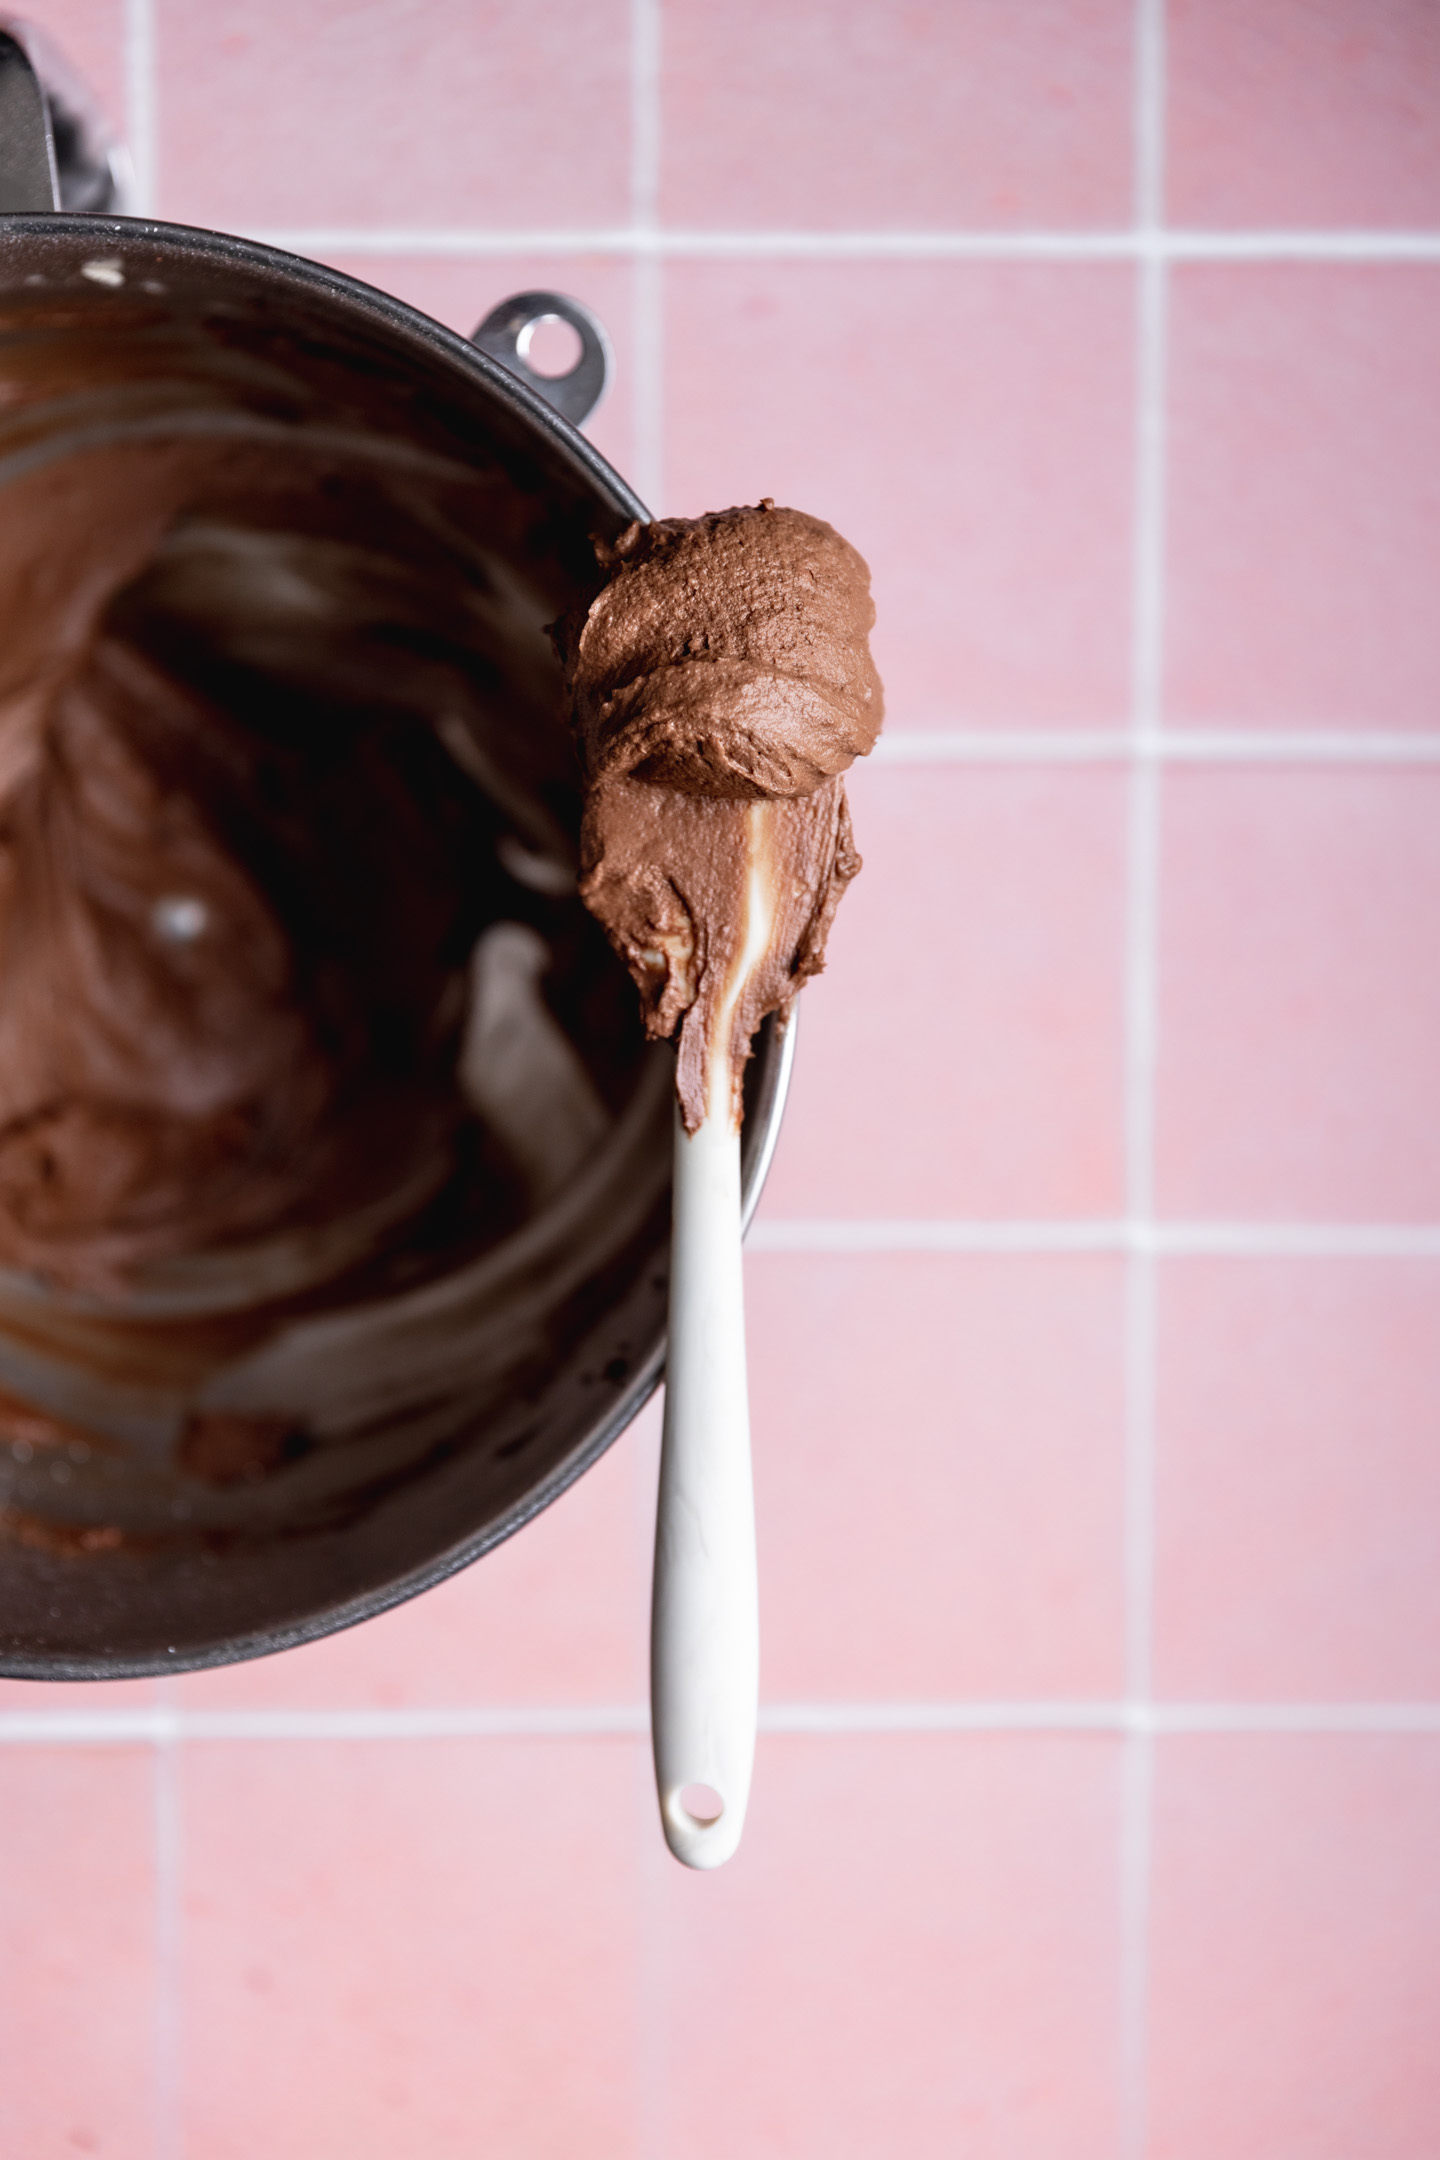 A spatula over a mixing bowl with dairy free chocolate frosting on it.